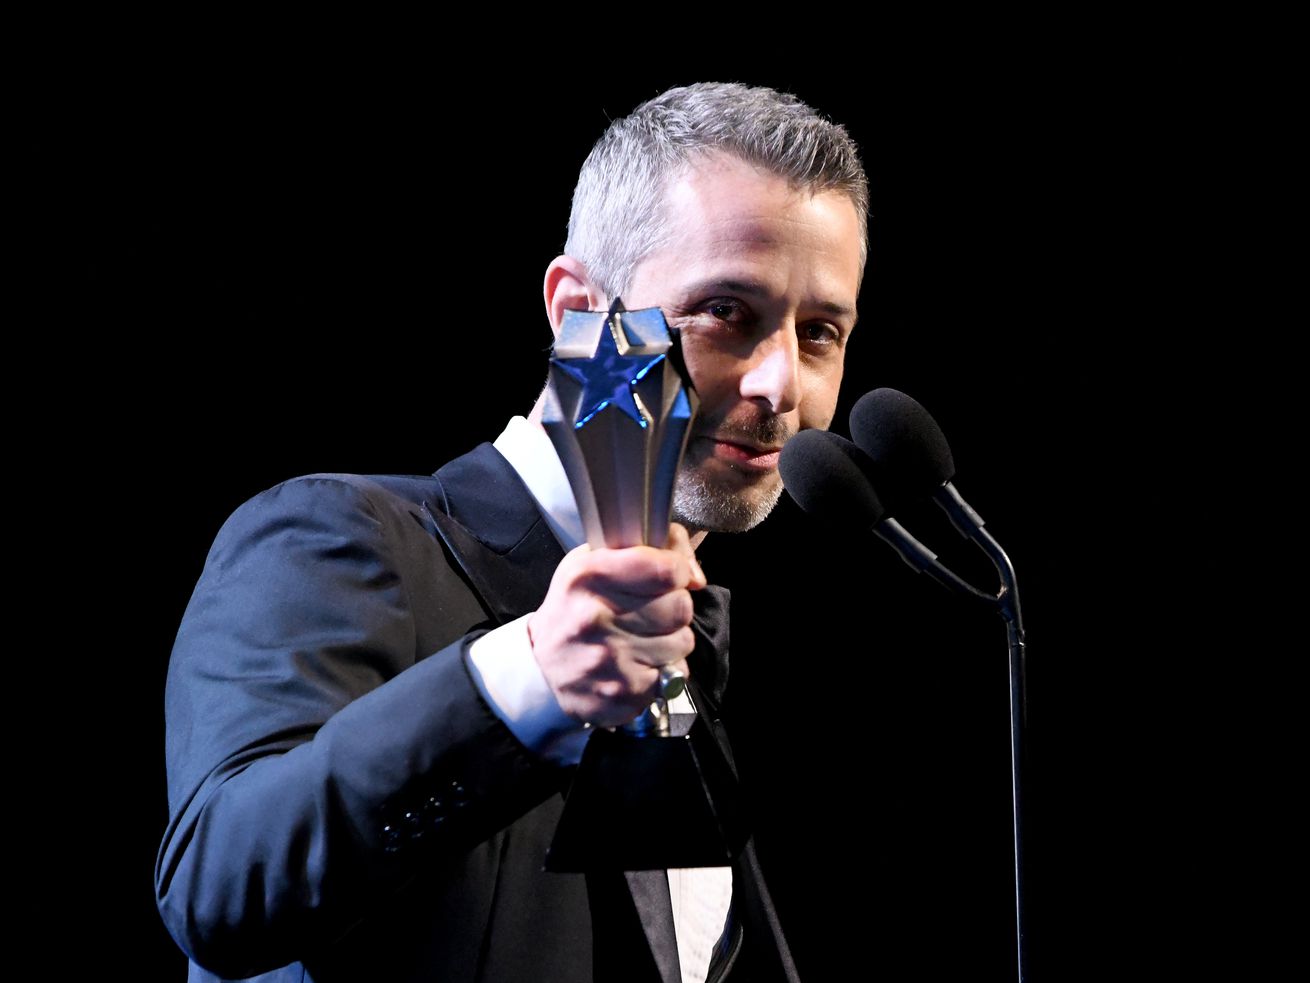 Jeremy Strong holding the award for Best Actor in a Drama Series award for “Succession” during the 25th Annual Critics’ Choice Awards on January 12, 2020, in Santa Monica, California.